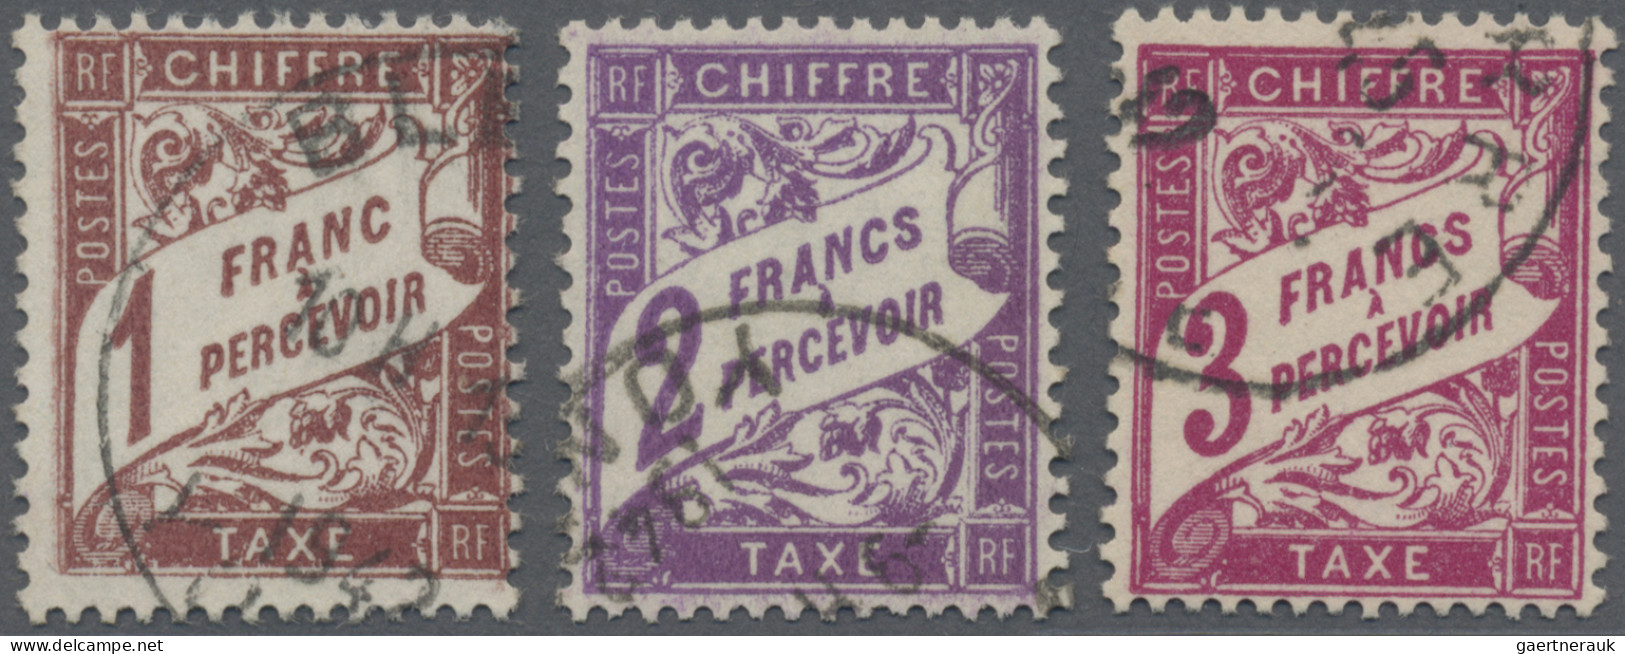 France - Postage Dues: 1884, 1 Fr. - 5 Fr. Red Brown, 3 Stamps, Used, 600,- - 1960-.... Usati